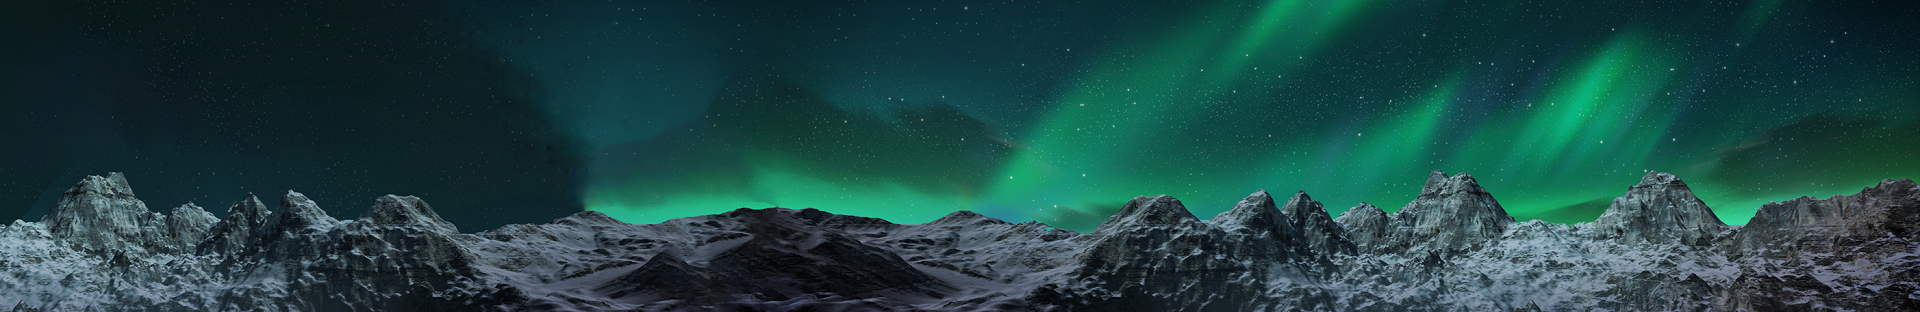 bnr-mountain-range-with-northern-lights-01